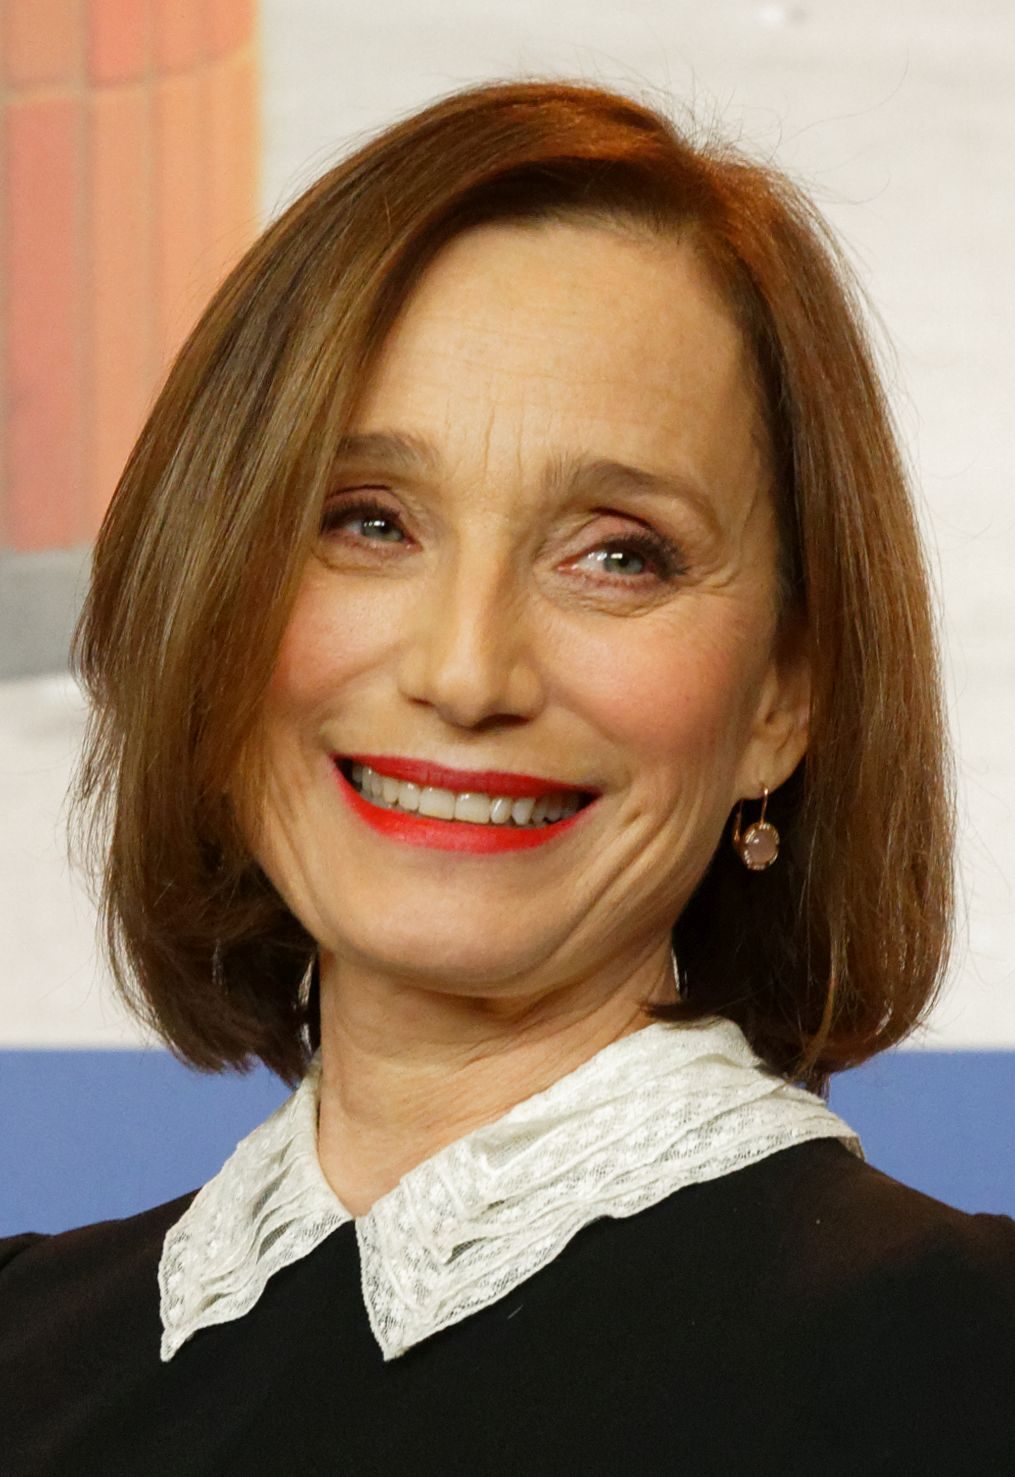 Kristin_Scott_Thomas_Press_Conference_The_Party_Berlinale_2017_02_cropped.jpg